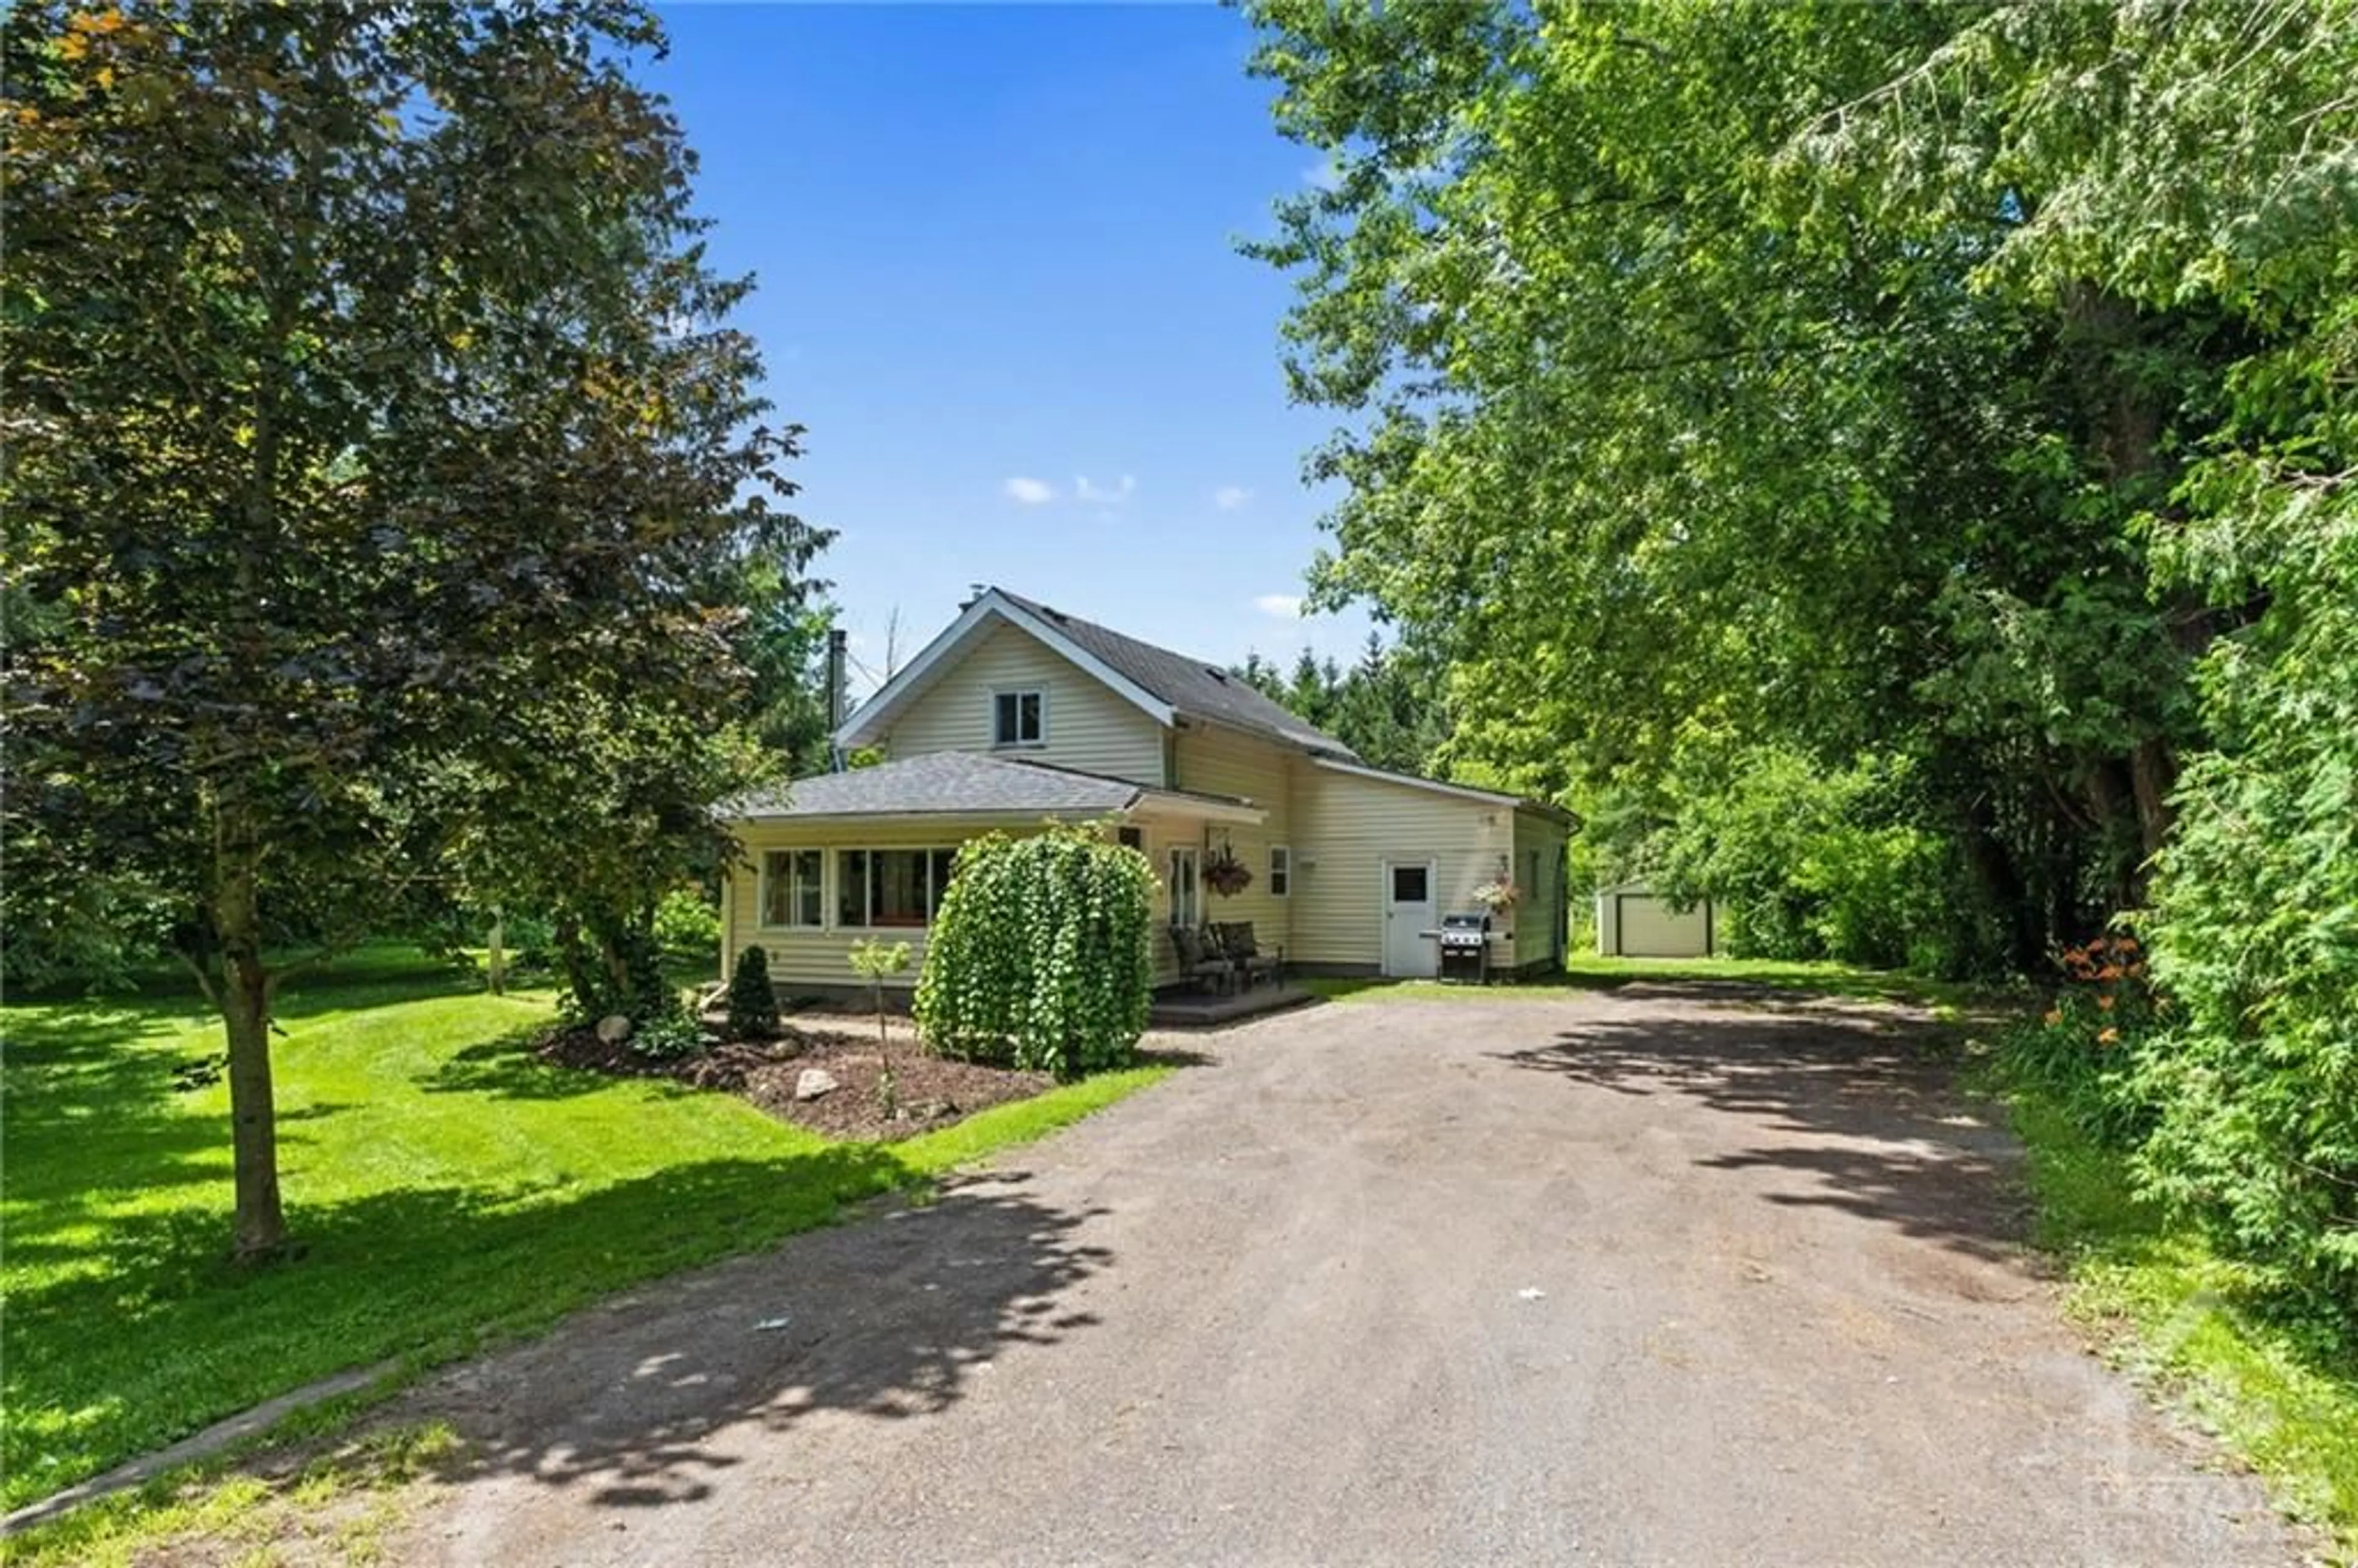 Cottage for 6552 RIDEAU VALLEY Dr, Manotick Ontario K4M 1B3